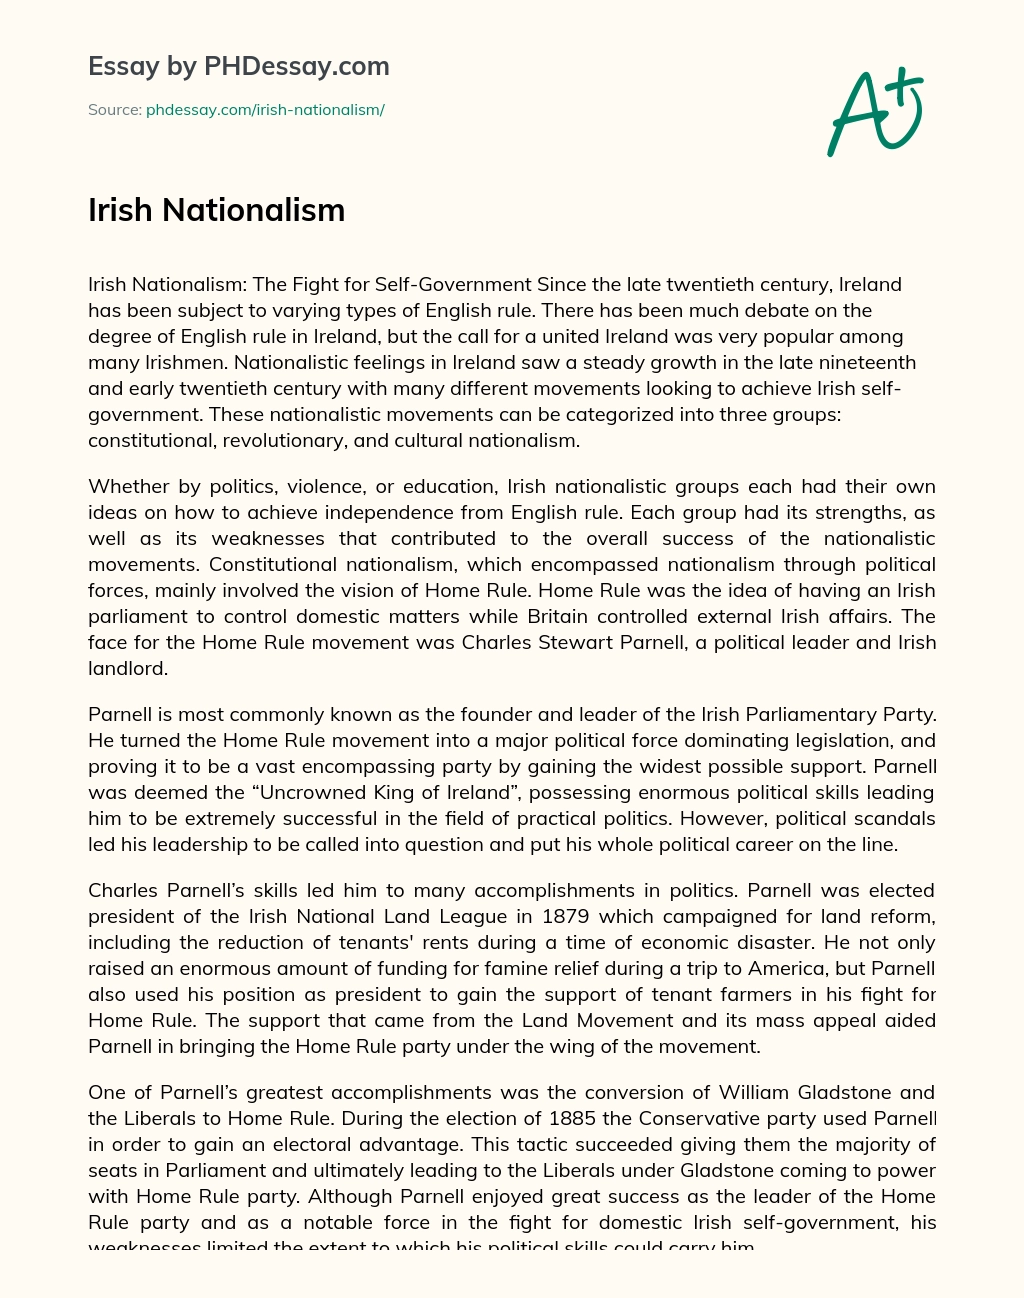 Irish Nationalism :The Fight for Self-Government essay